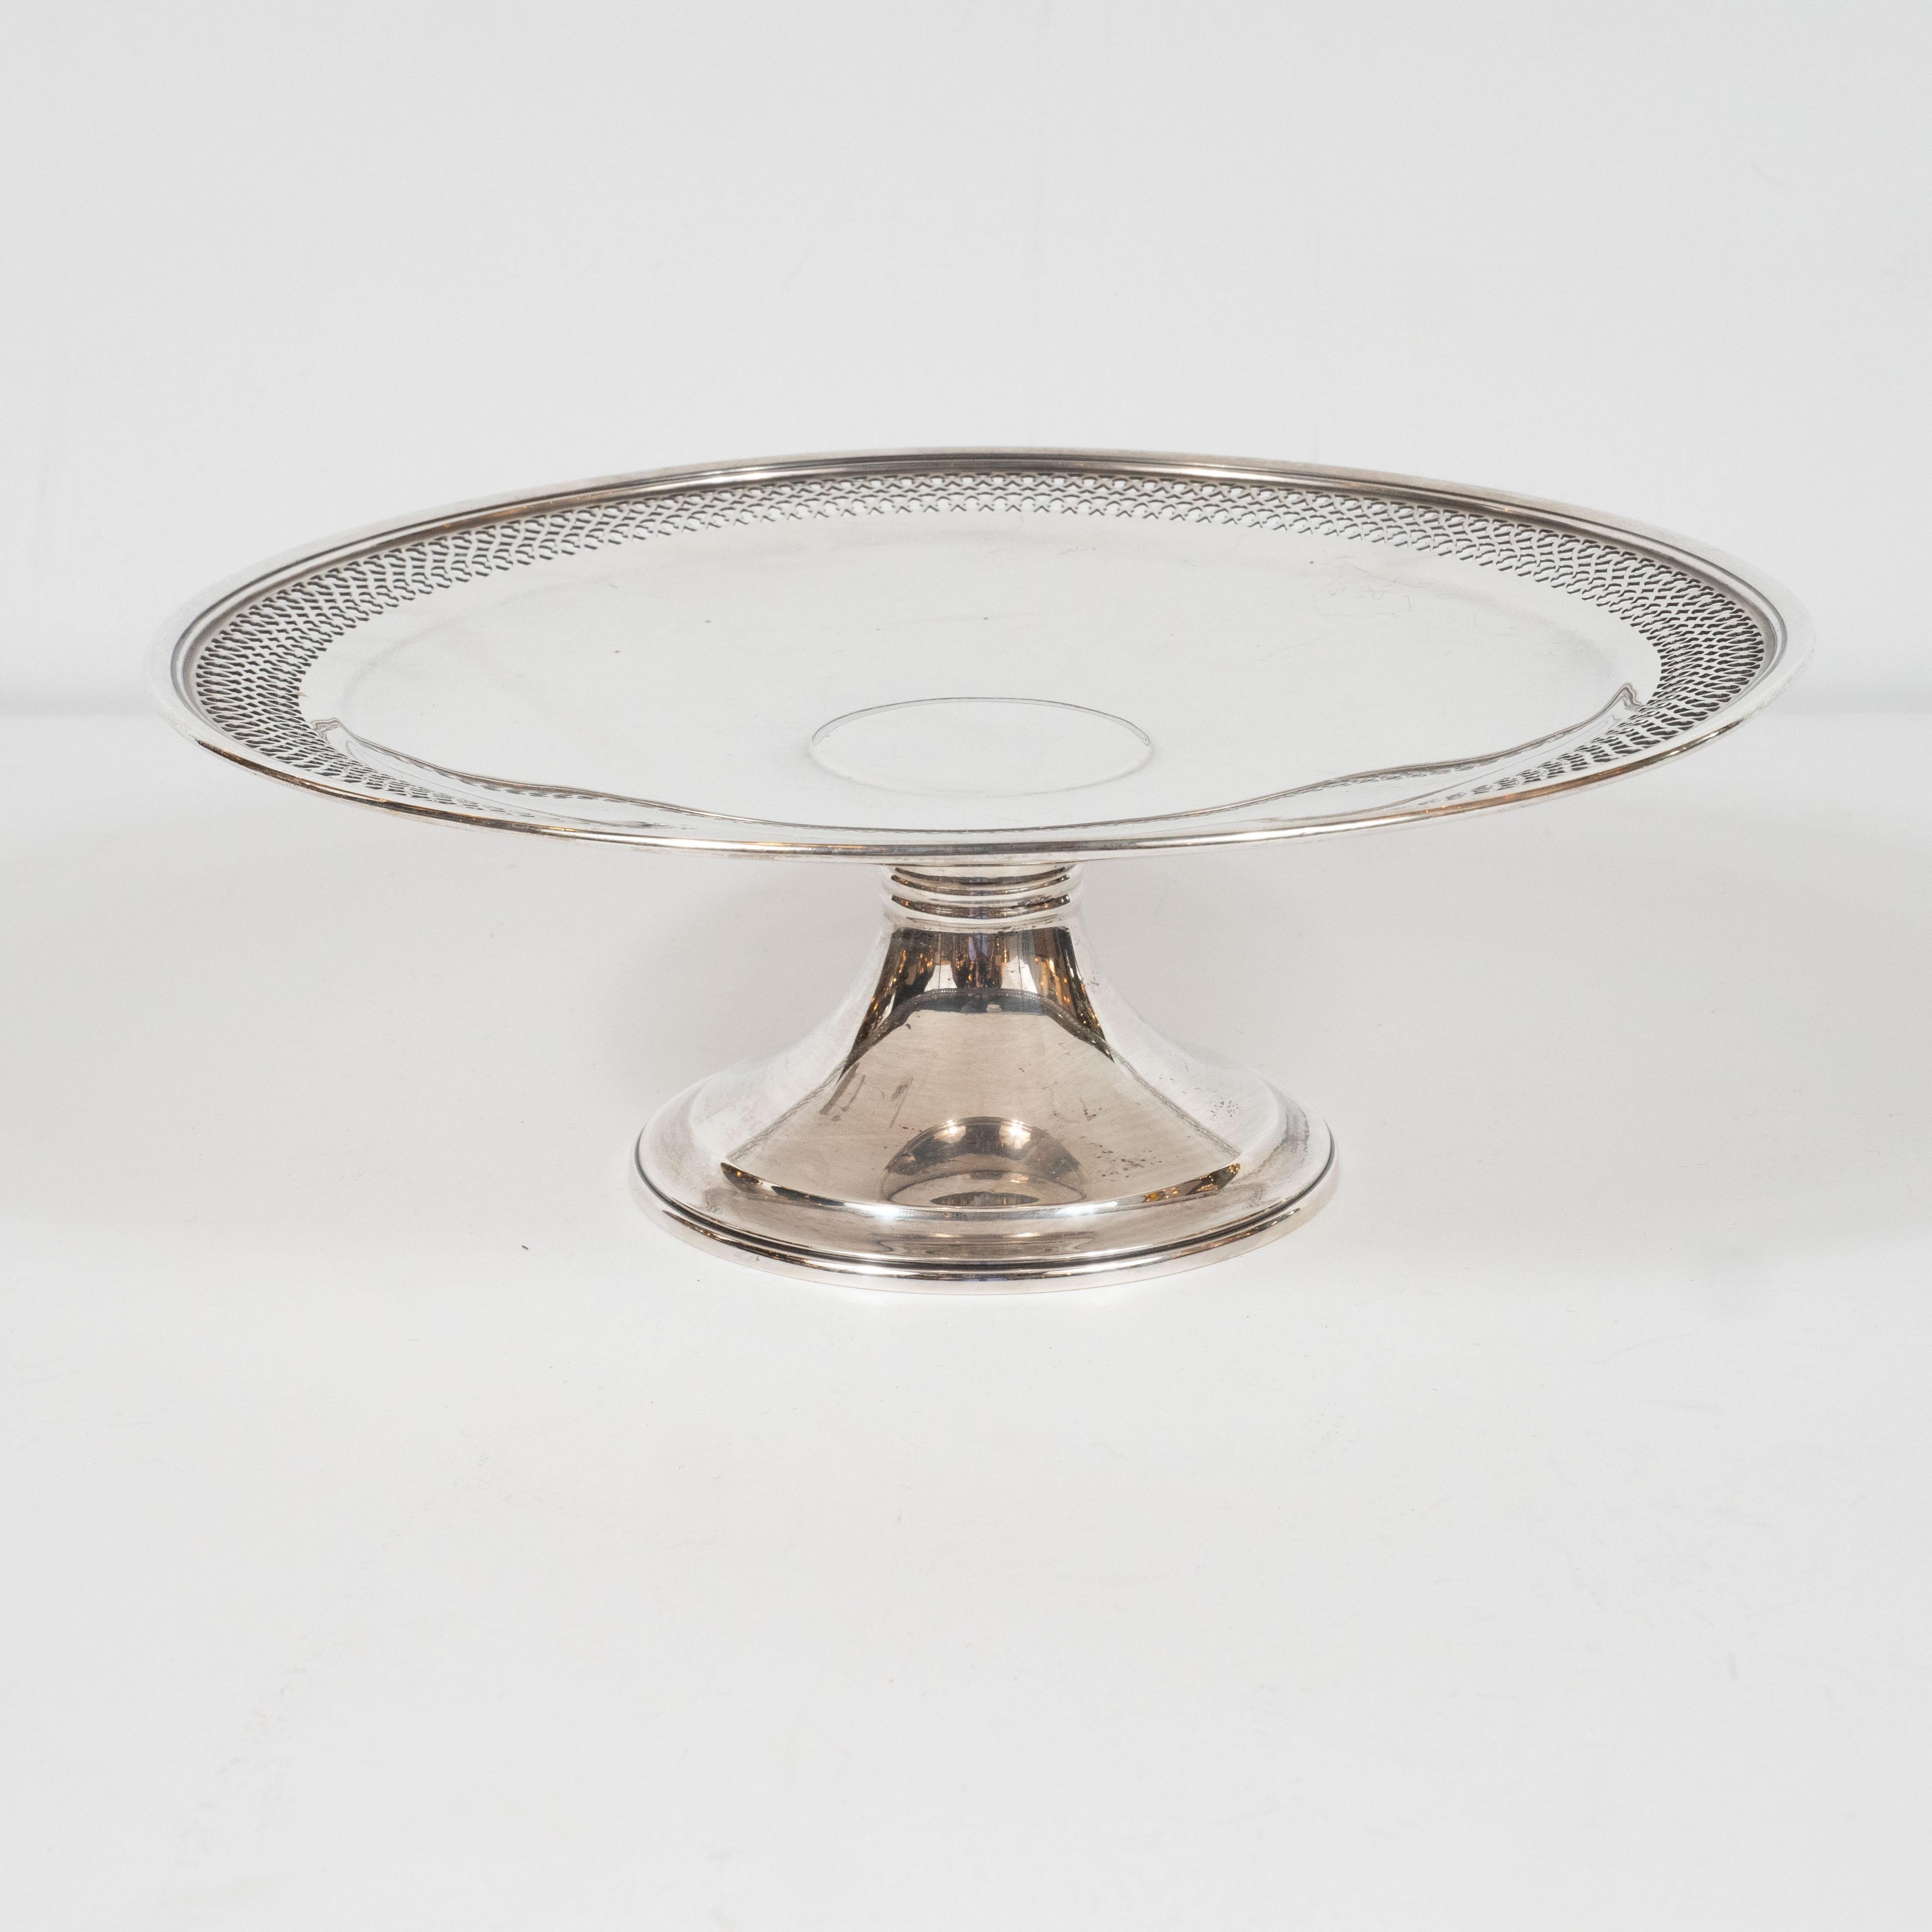 This elegant sterling silver tazza was realized by Tiffany & Co. one of America's premiere luxury makers of sterling silver and other precious objects since 1837. Designed by Tiffany & Co. in the United States, this piece embodies the timeless